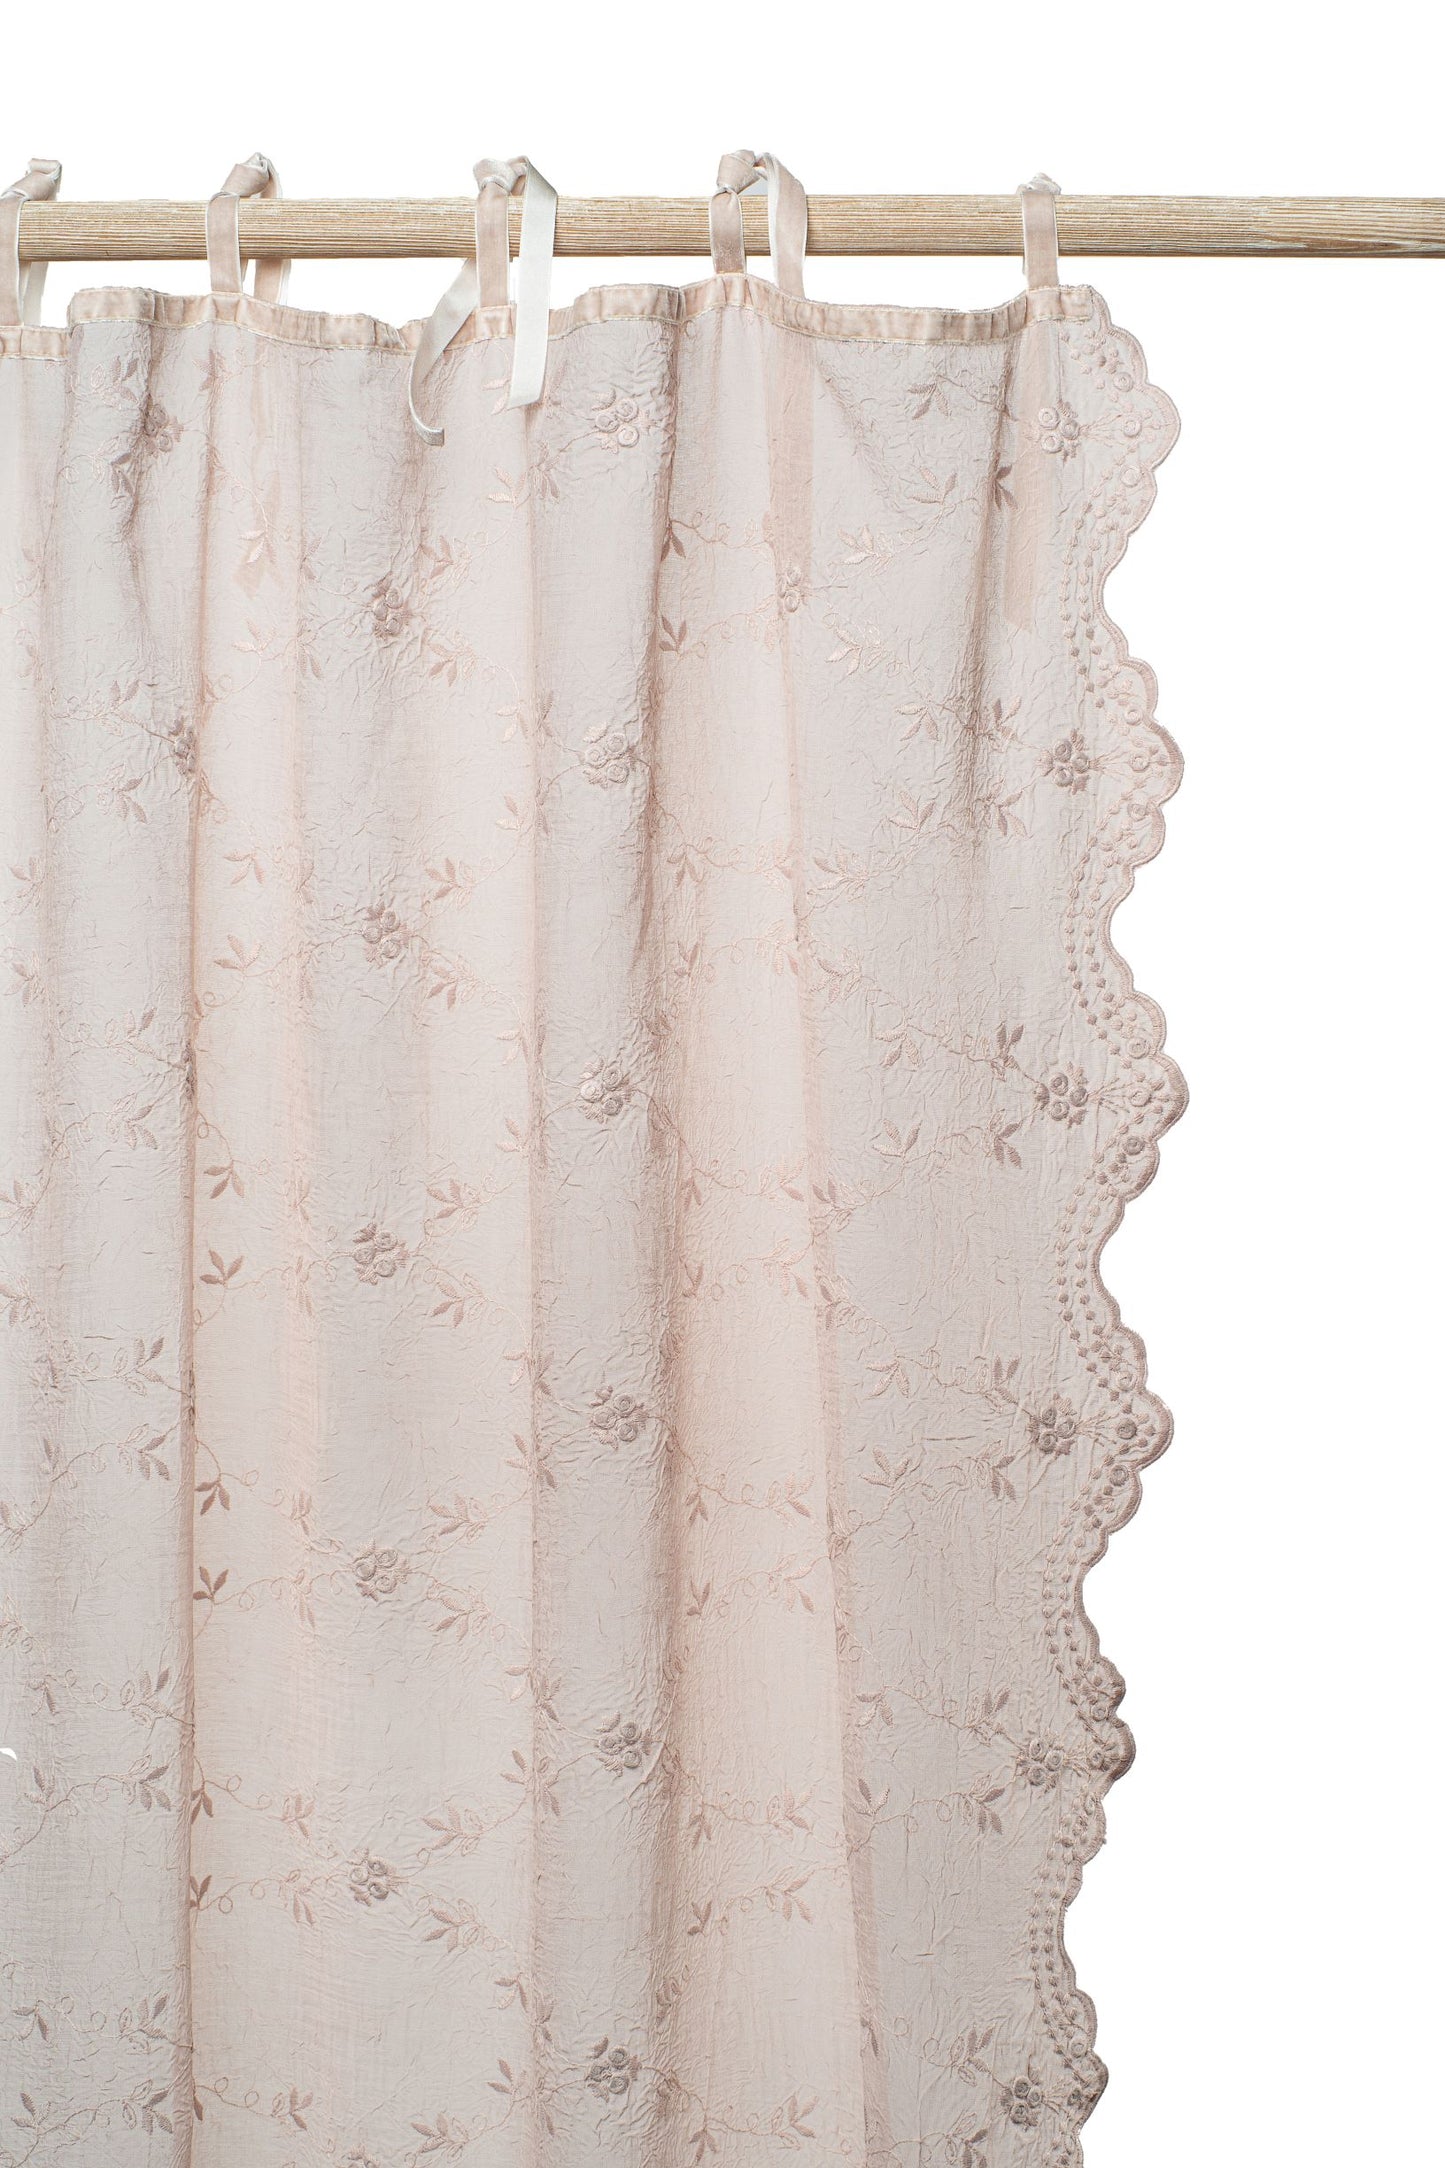 The Victoria embroidered voile curtain adds that special touch to your window. This design is timeless and will fit any interior. Finished with velvet ribbons and a lovely scallop on both lengths.